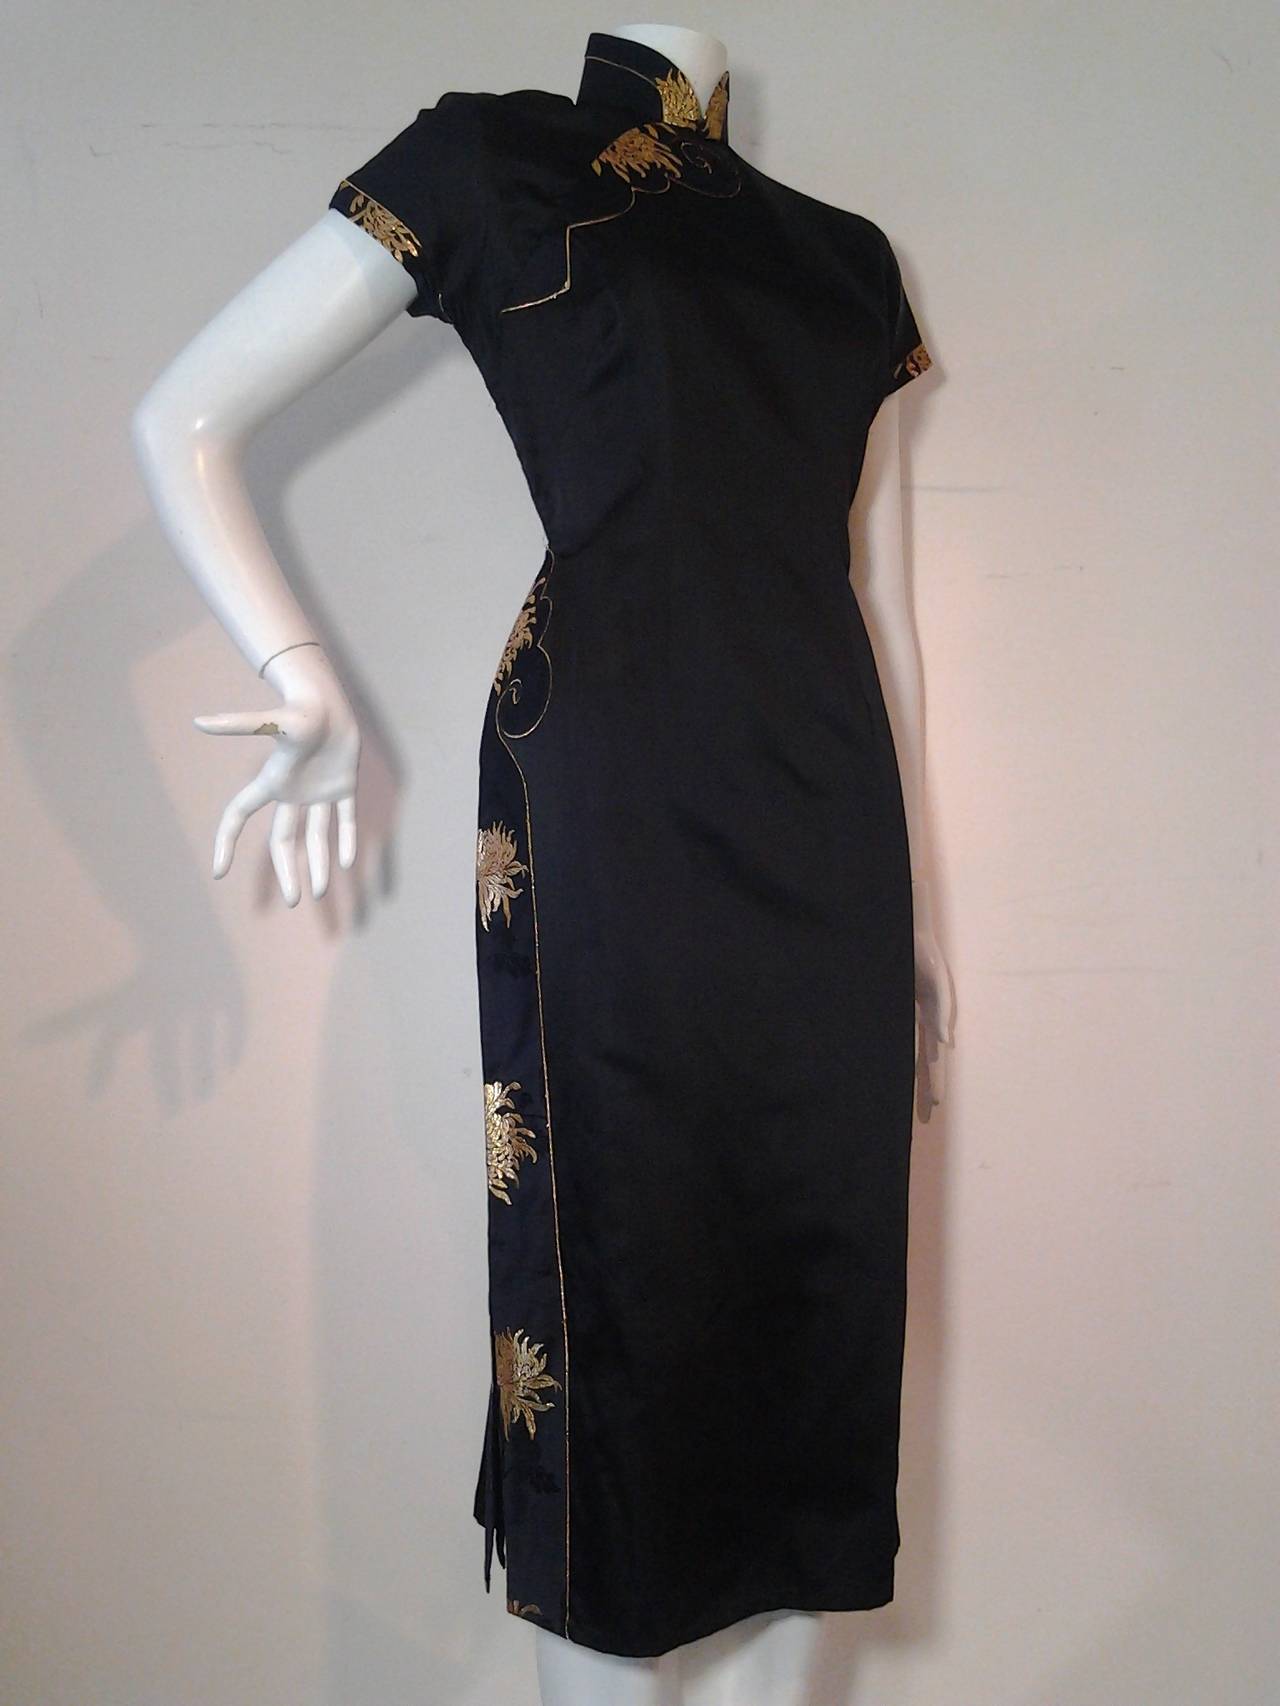 A gorgeous 1950s Hong Kong silk satin cheongsam with gold piping detail and chrysanthemum panels in gold brocade.  Side zipper and snaps at shoulder for easy on and off.